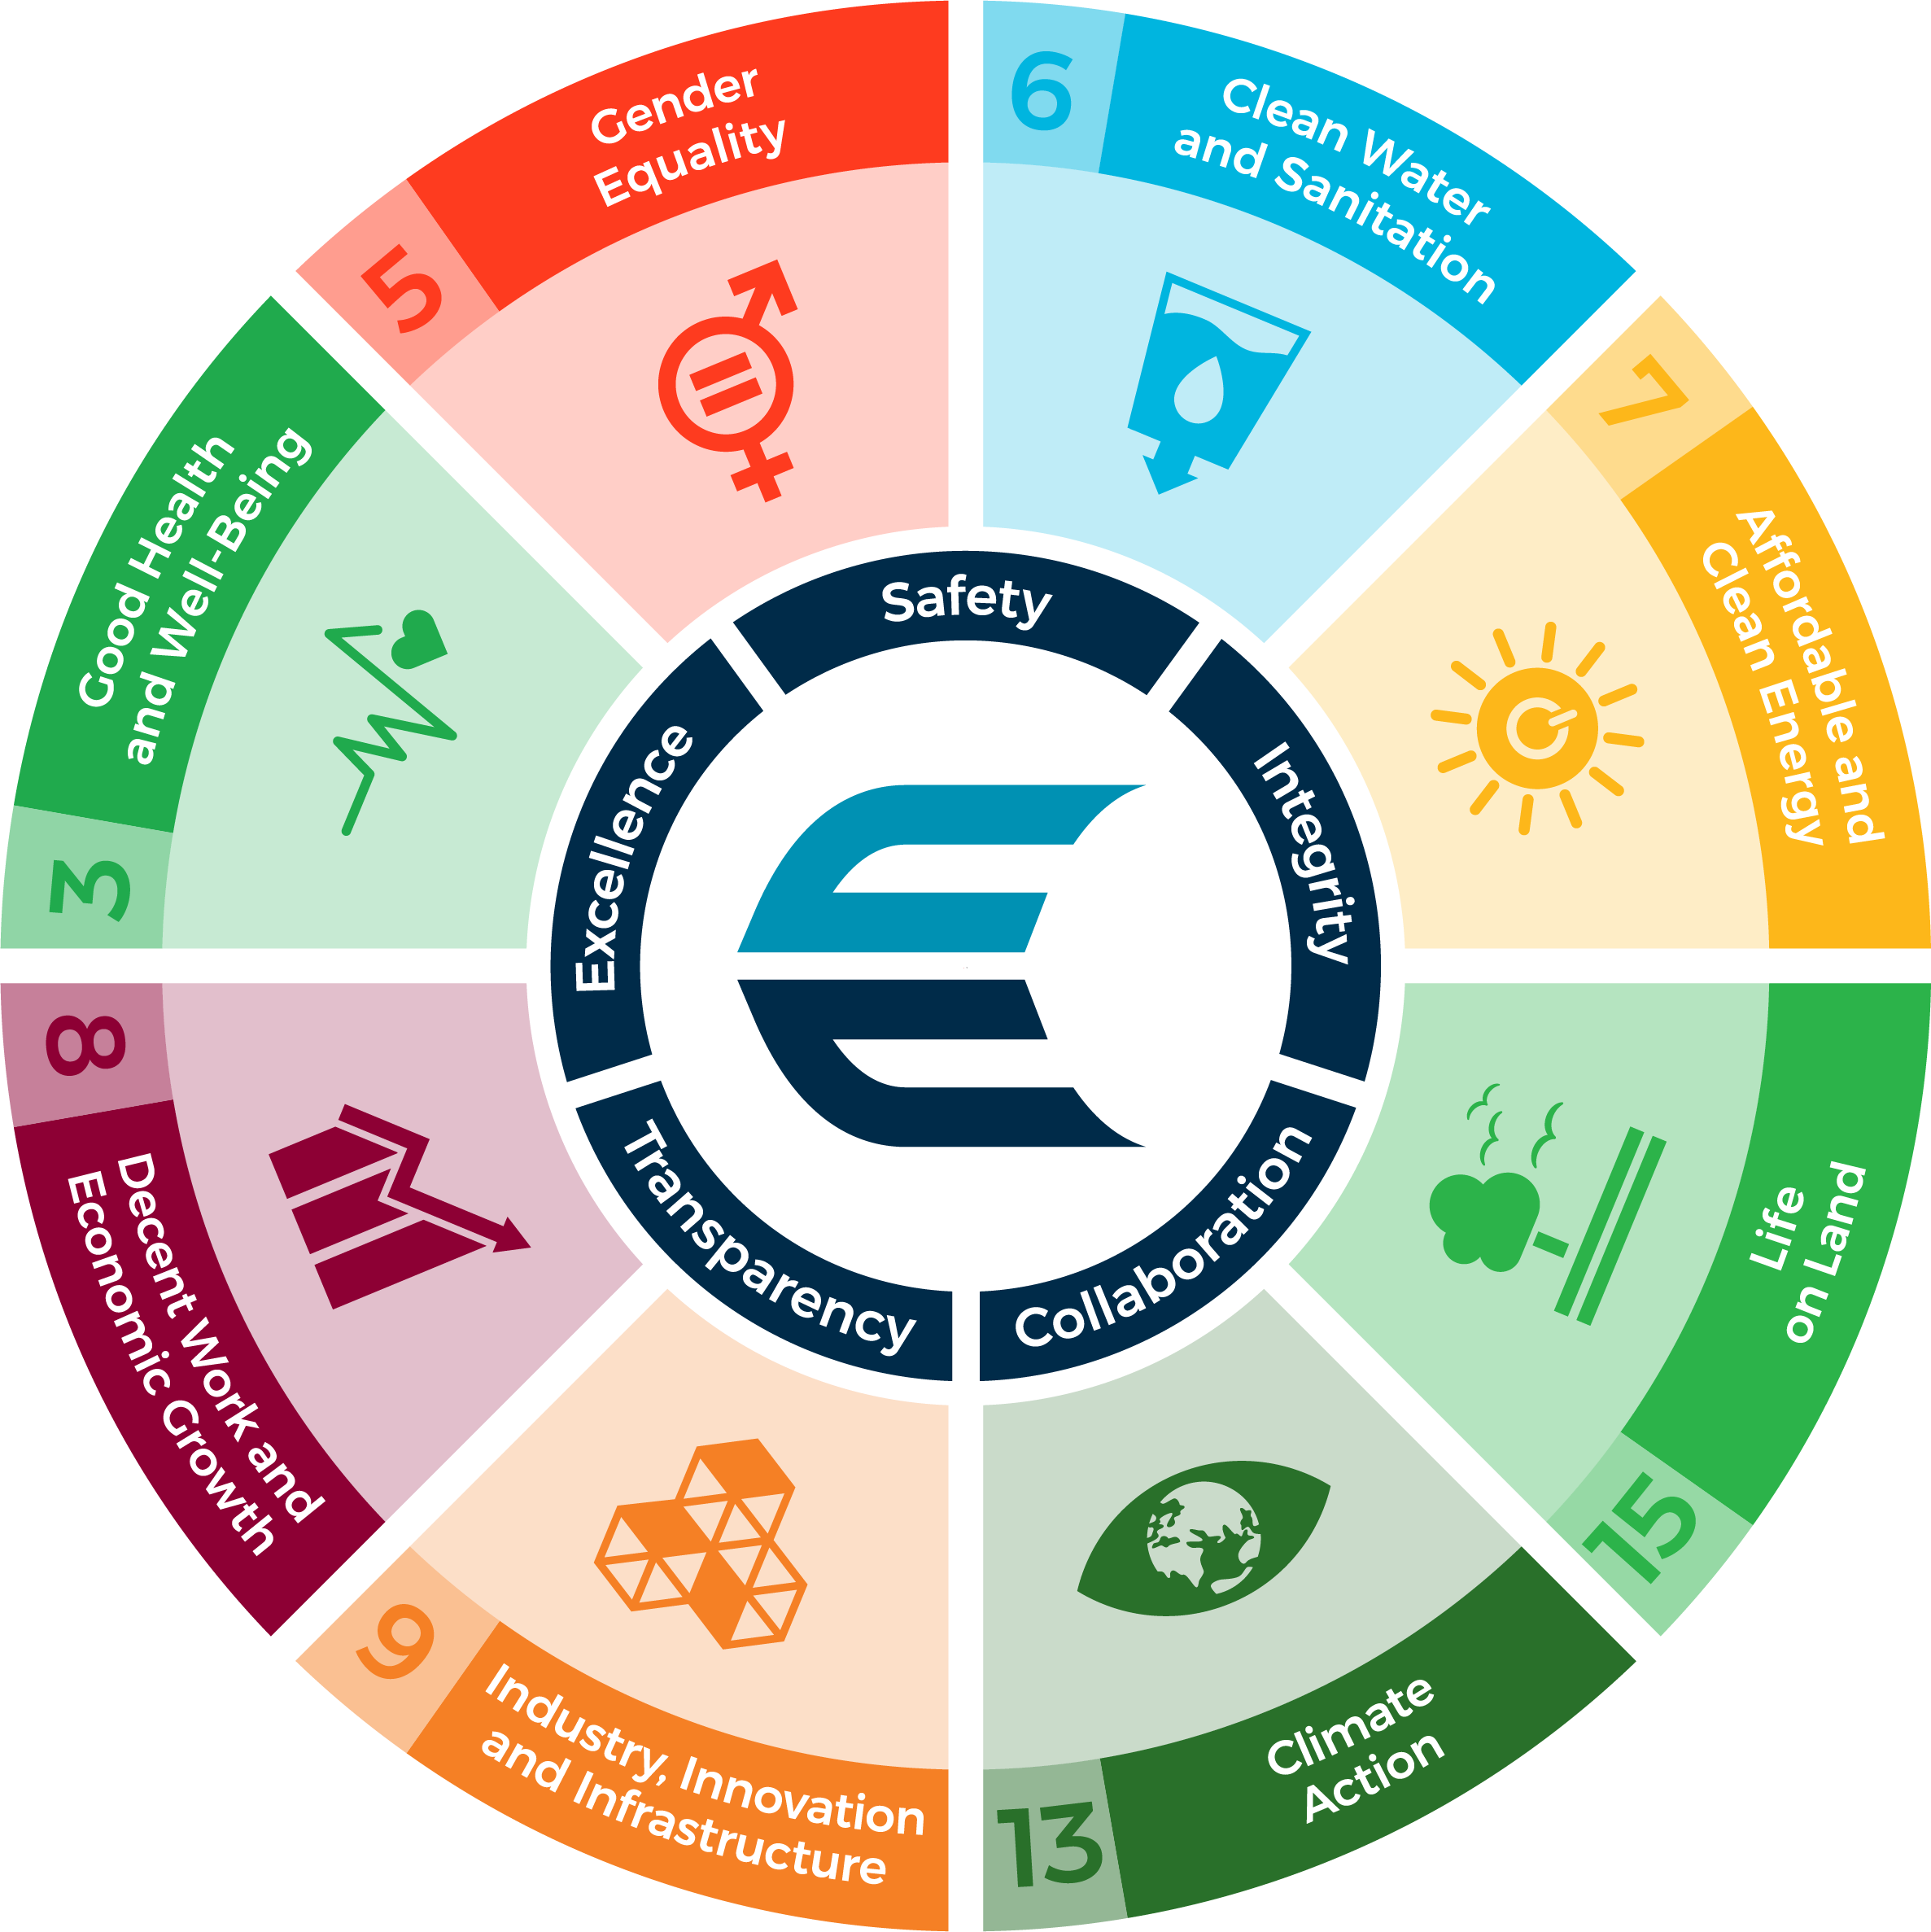 Equitrans designed a graphic to show that the company's core values align with the eight United Nations Sustainable Development Goals that Equitrans has chosen to focus on. Equitrans' core values of Safety, Integrity, Collaboration, Transparency, and Excellence align with the Gender Equality, Clean Water and Sanitization, Affordable and Clean Energy, Life on Land, Climate Action, Industry, Innovation, and Infrastructure, Decent Work and Economic Growth, and Good Health and Well Being Sustainable Development Goals.